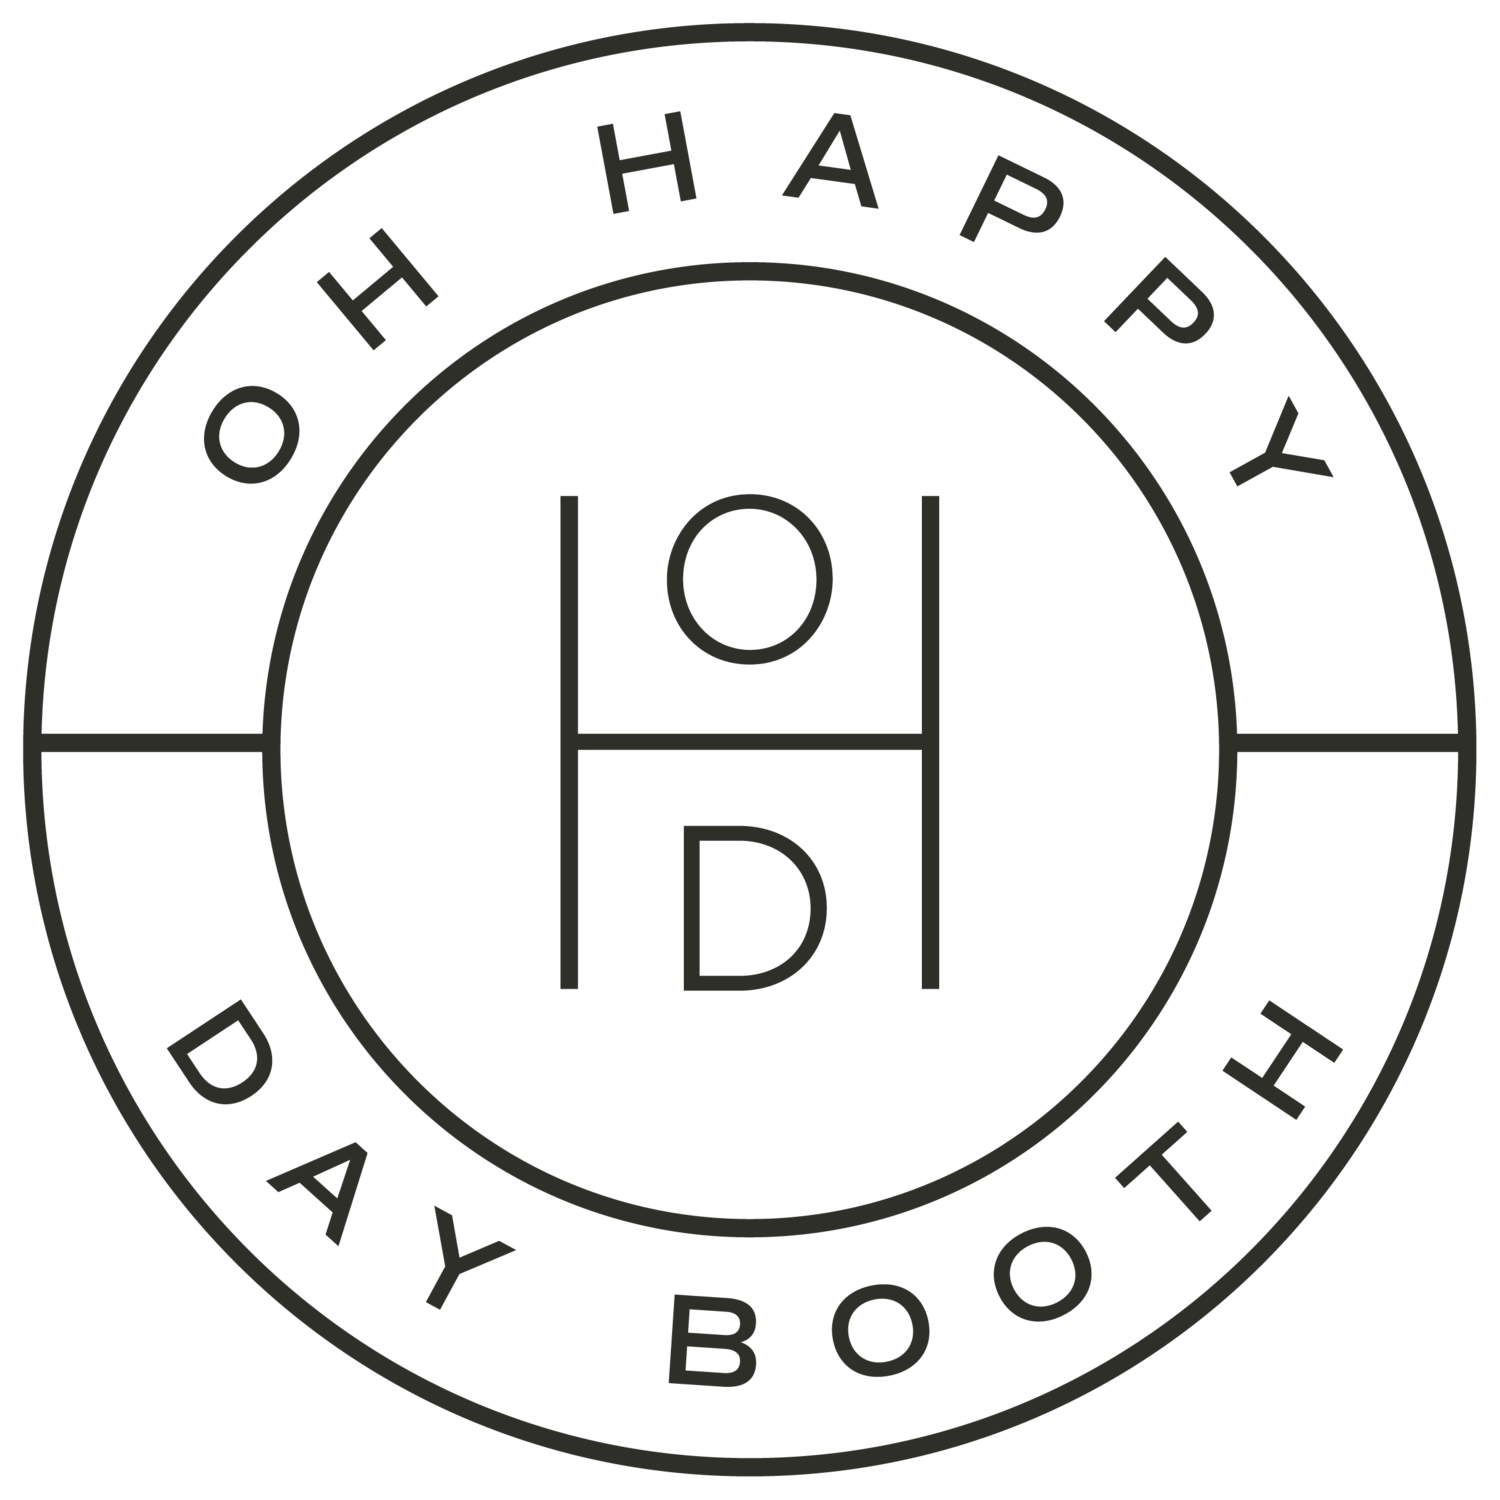 Oh Happy Day Booth